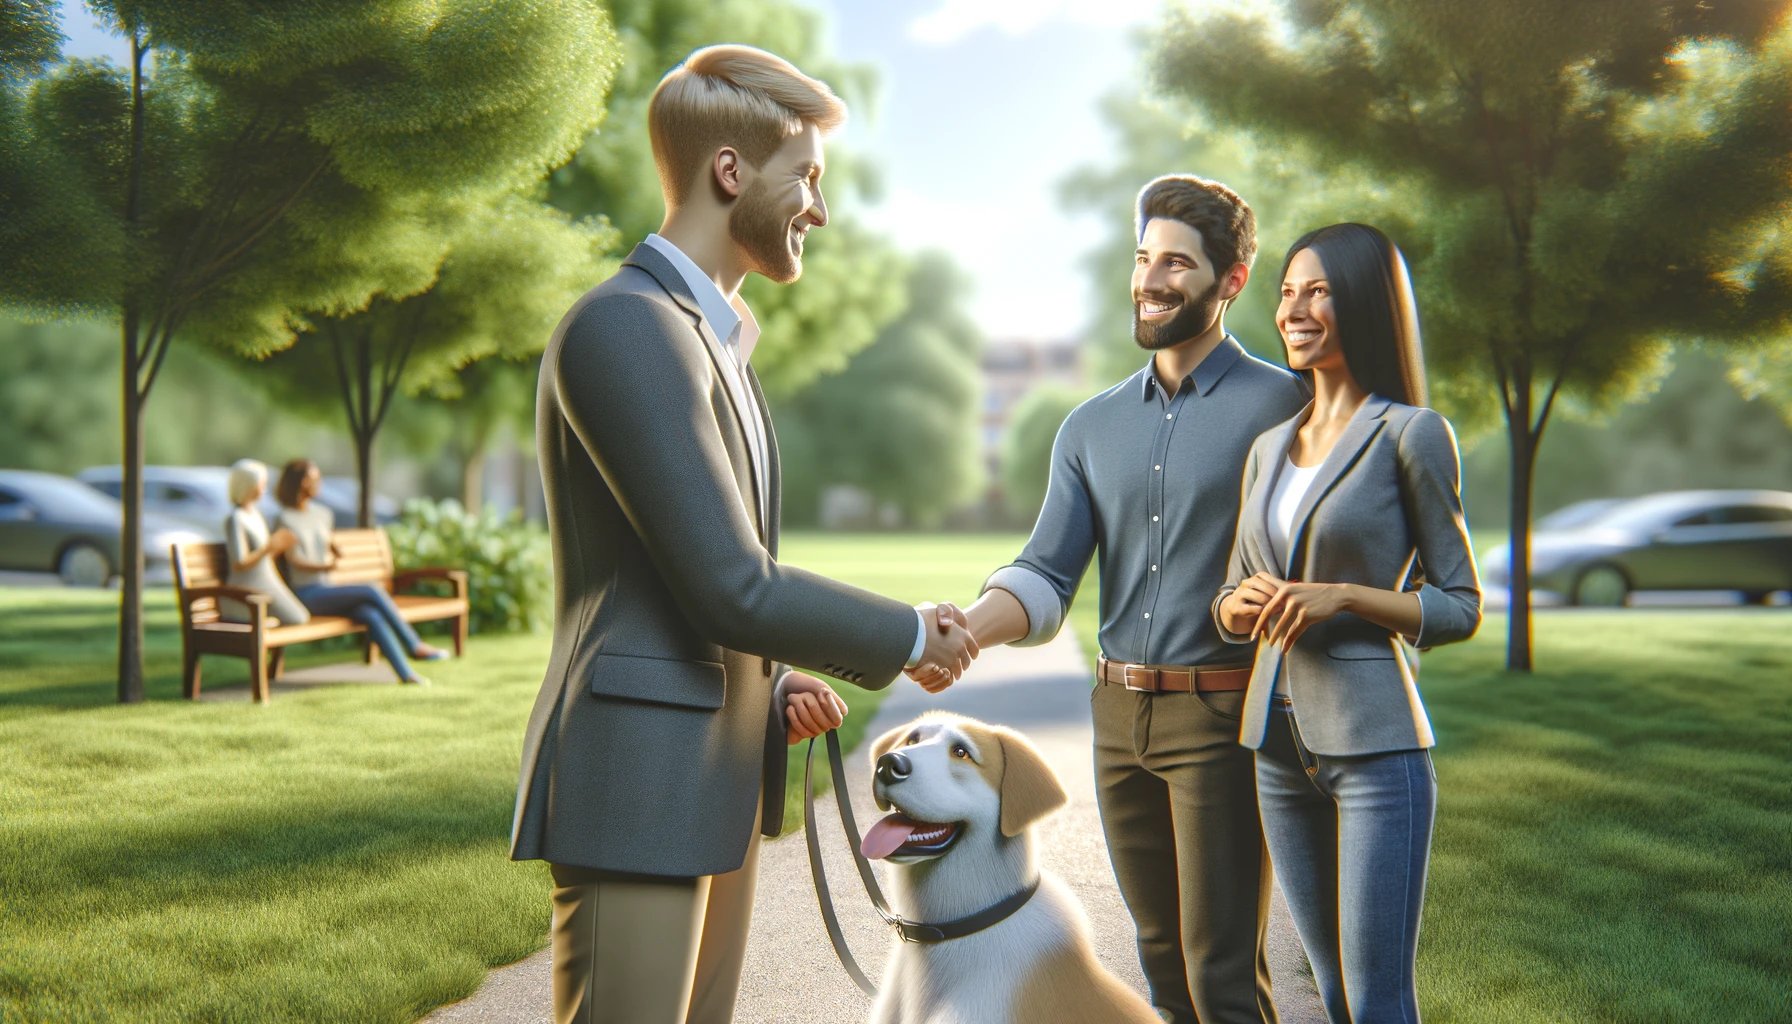 A realistic photograph of a Caucasian man meeting with a client and their dog in a park. The setting includes a green, open space with trees in the background. The man and client are shaking hands and smiling, while the dog looks happy and excited. The atmosphere is friendly and professional.